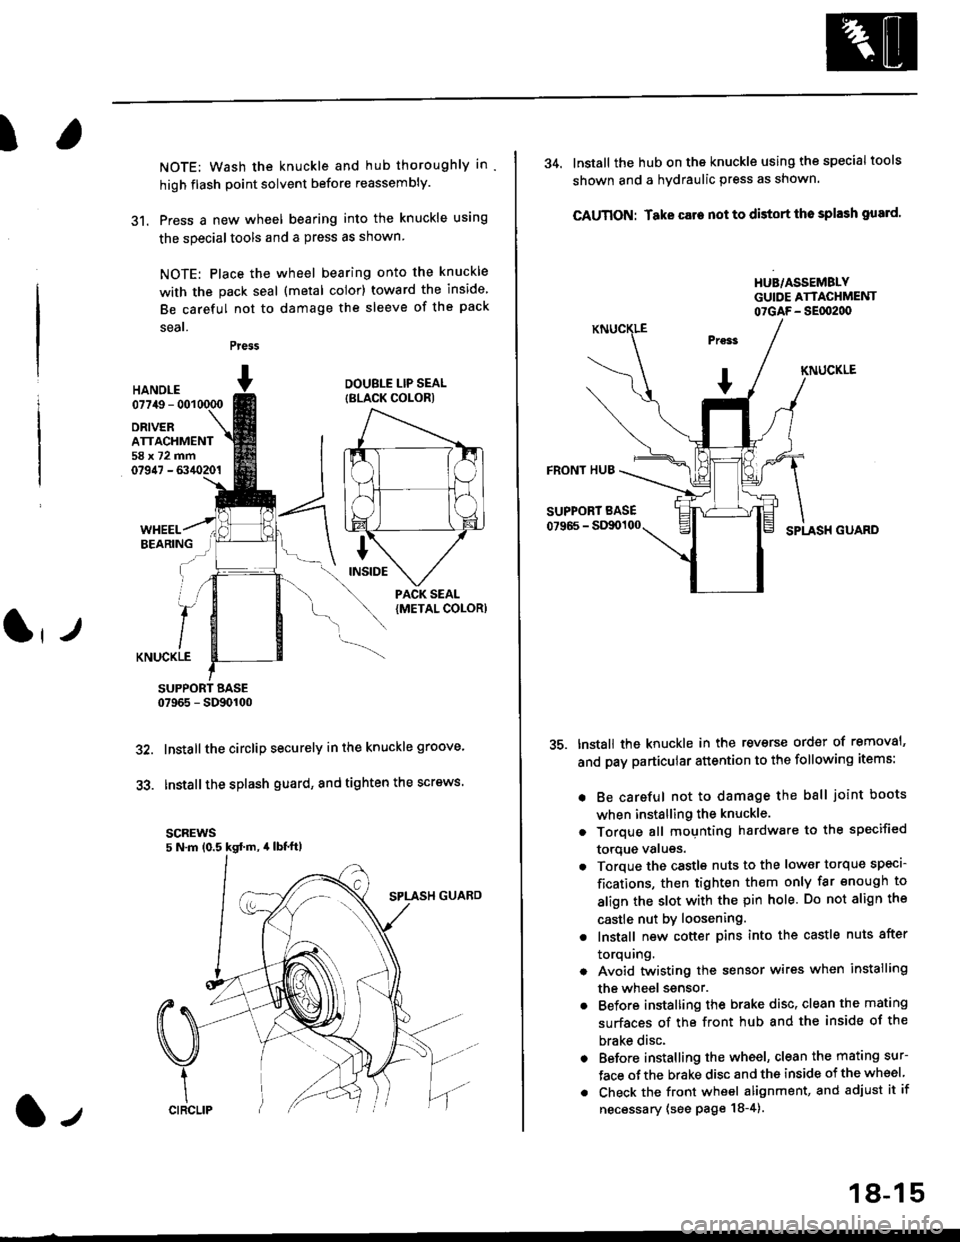 HONDA CIVIC 1997 6.G Owners Manual I
NOTE: Wash the knuckle and hub thoroughly in
high flash point solvent before reassembly.
31. Press a new wheel bearing into the knuckle using
the specialtools and a press as shown
NOTE: Place the wh